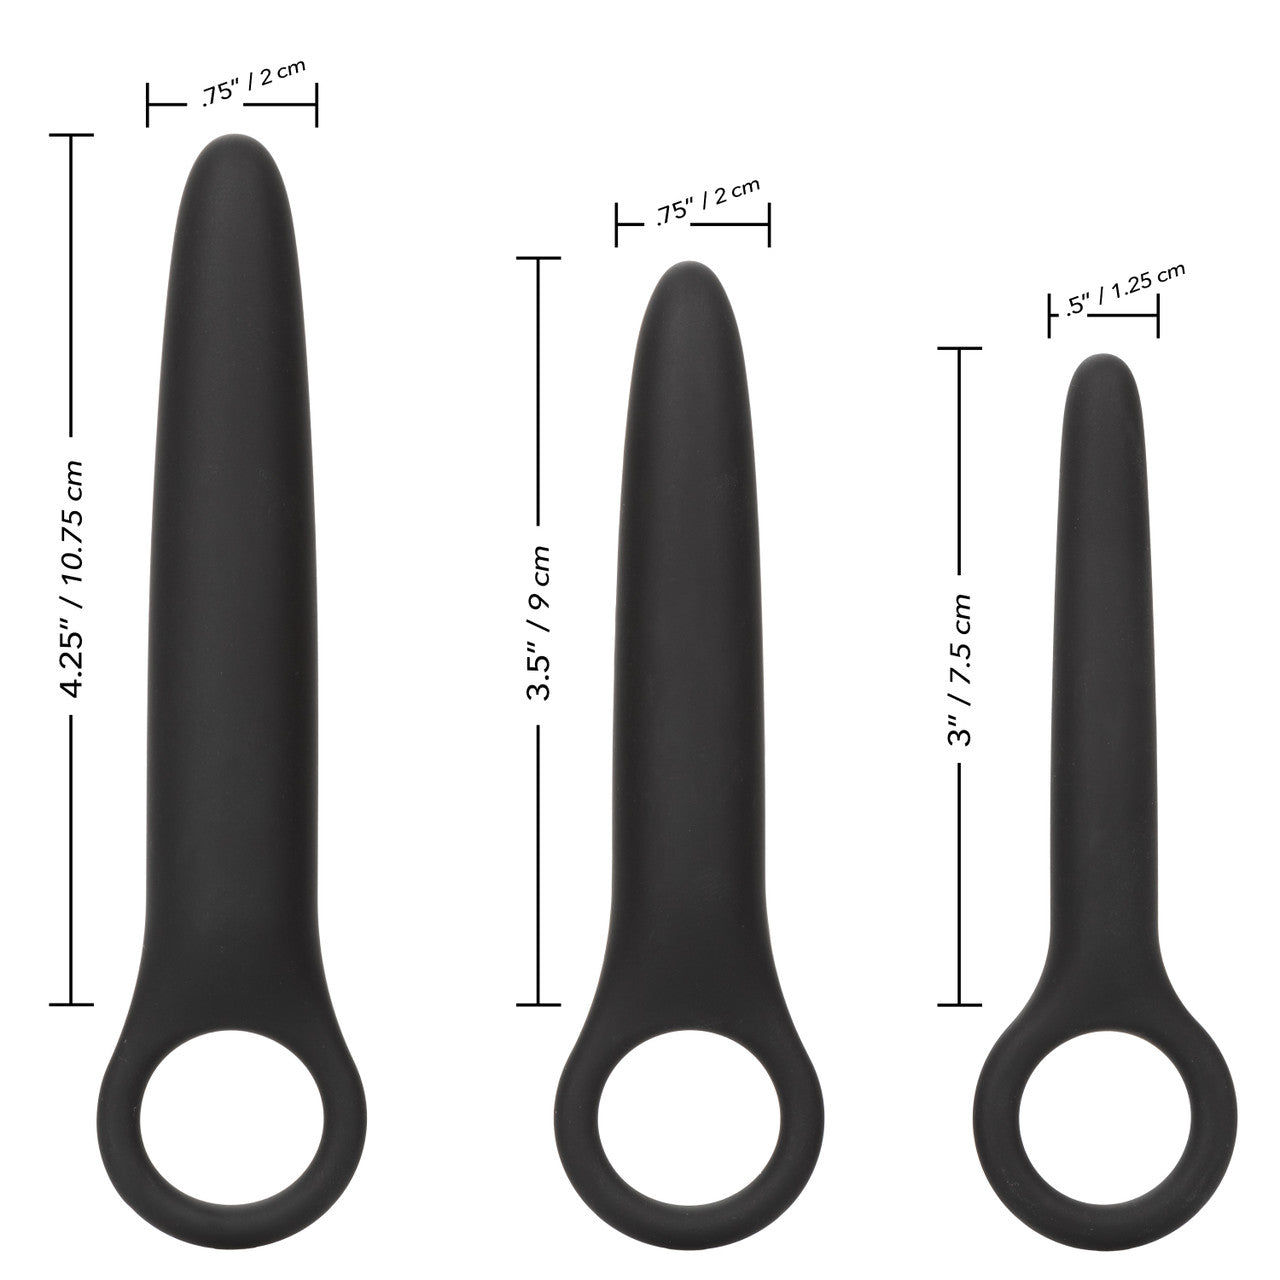 Boundless Dilator Trio - Thorn & Feather Sex Toy Canada